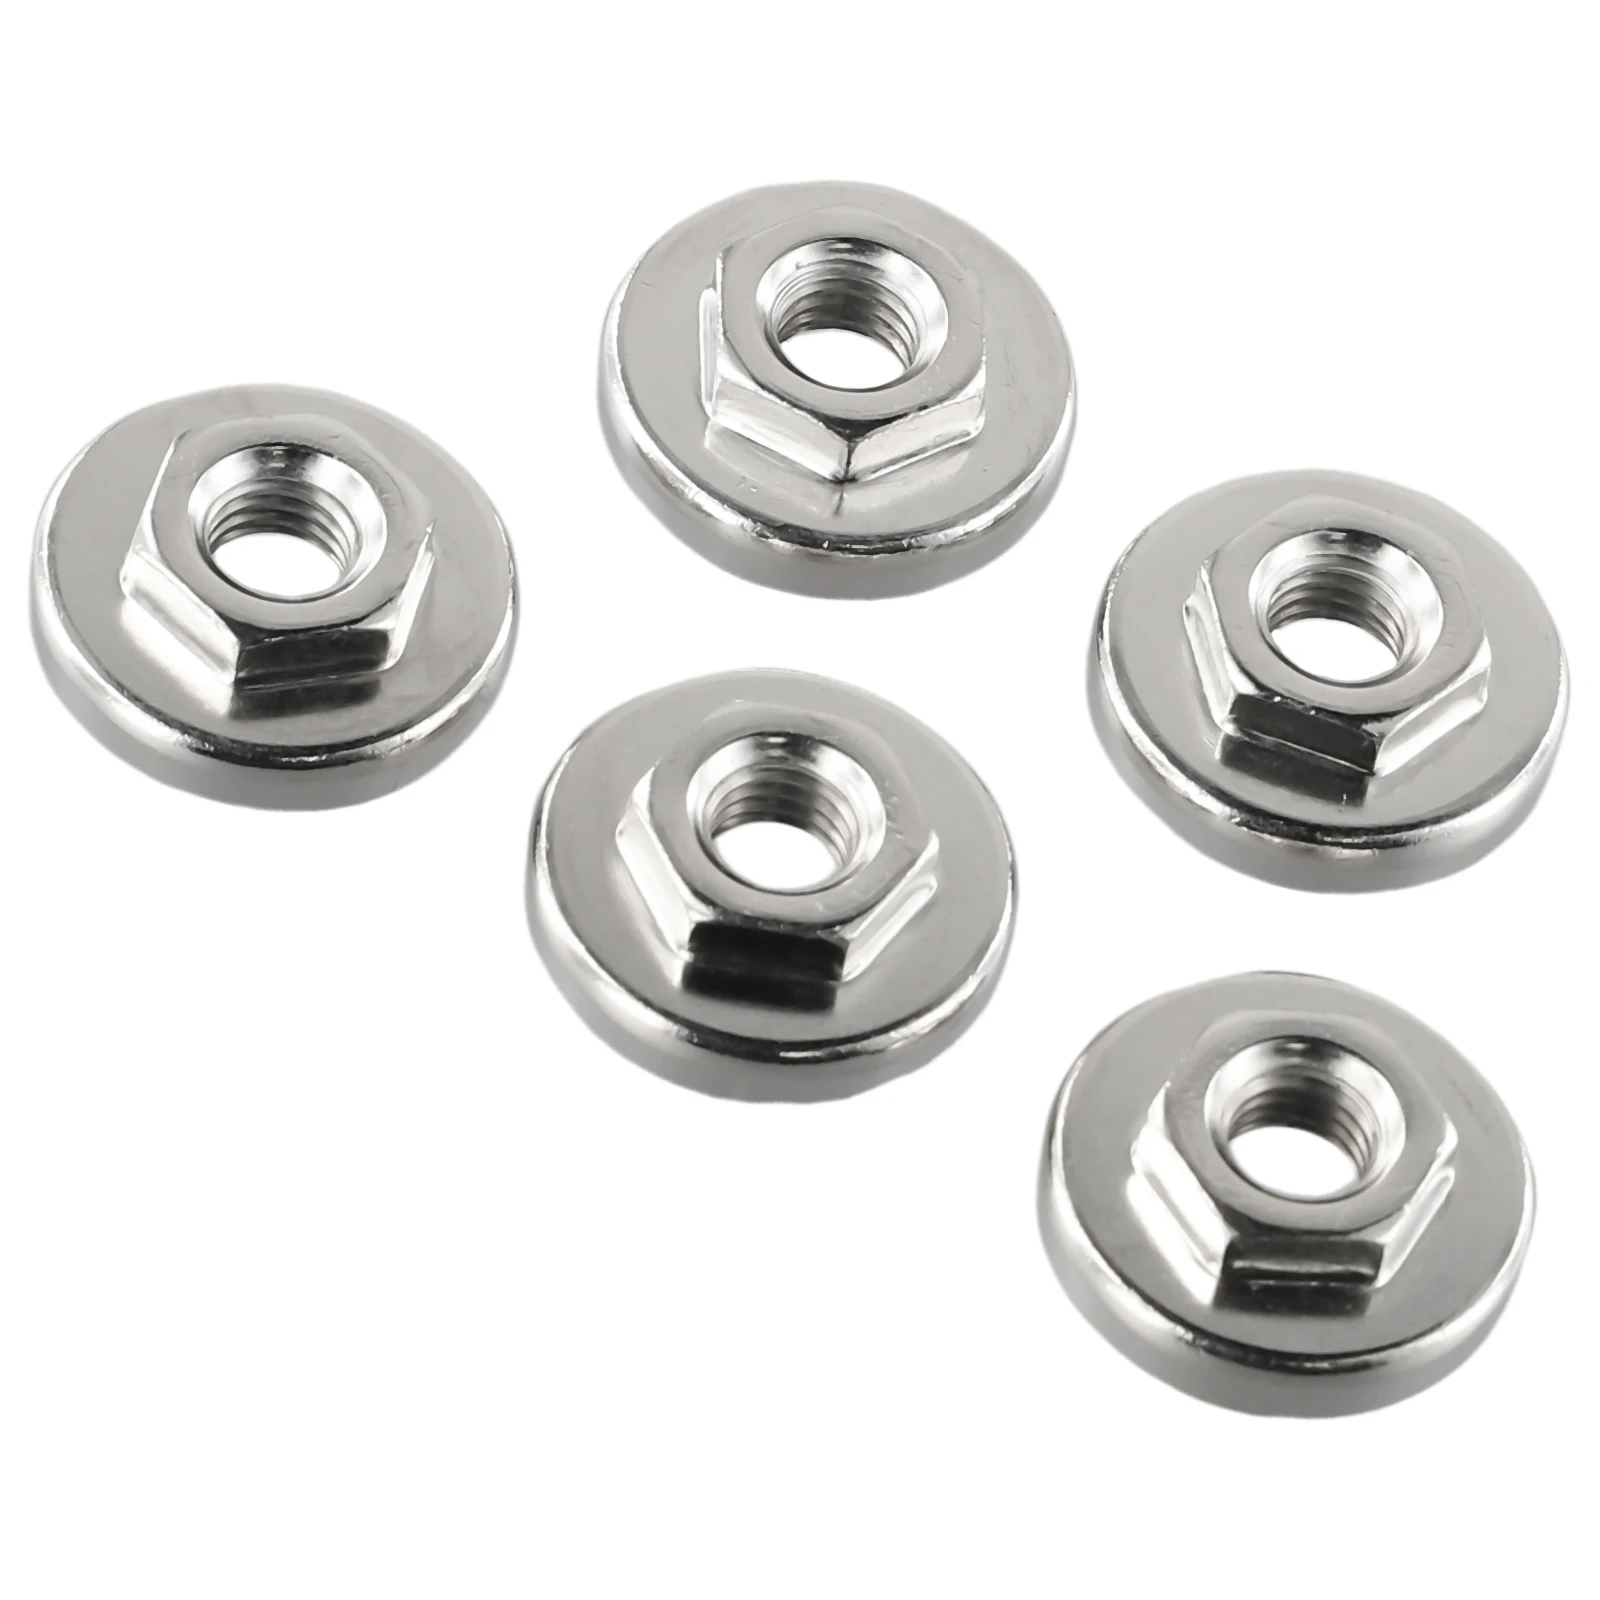 

100 Type Angle Grinder Nuts 30mm 5pcs M10 Silver Stainless Steel Angle Grinder Tool Accessories Brand New Durable